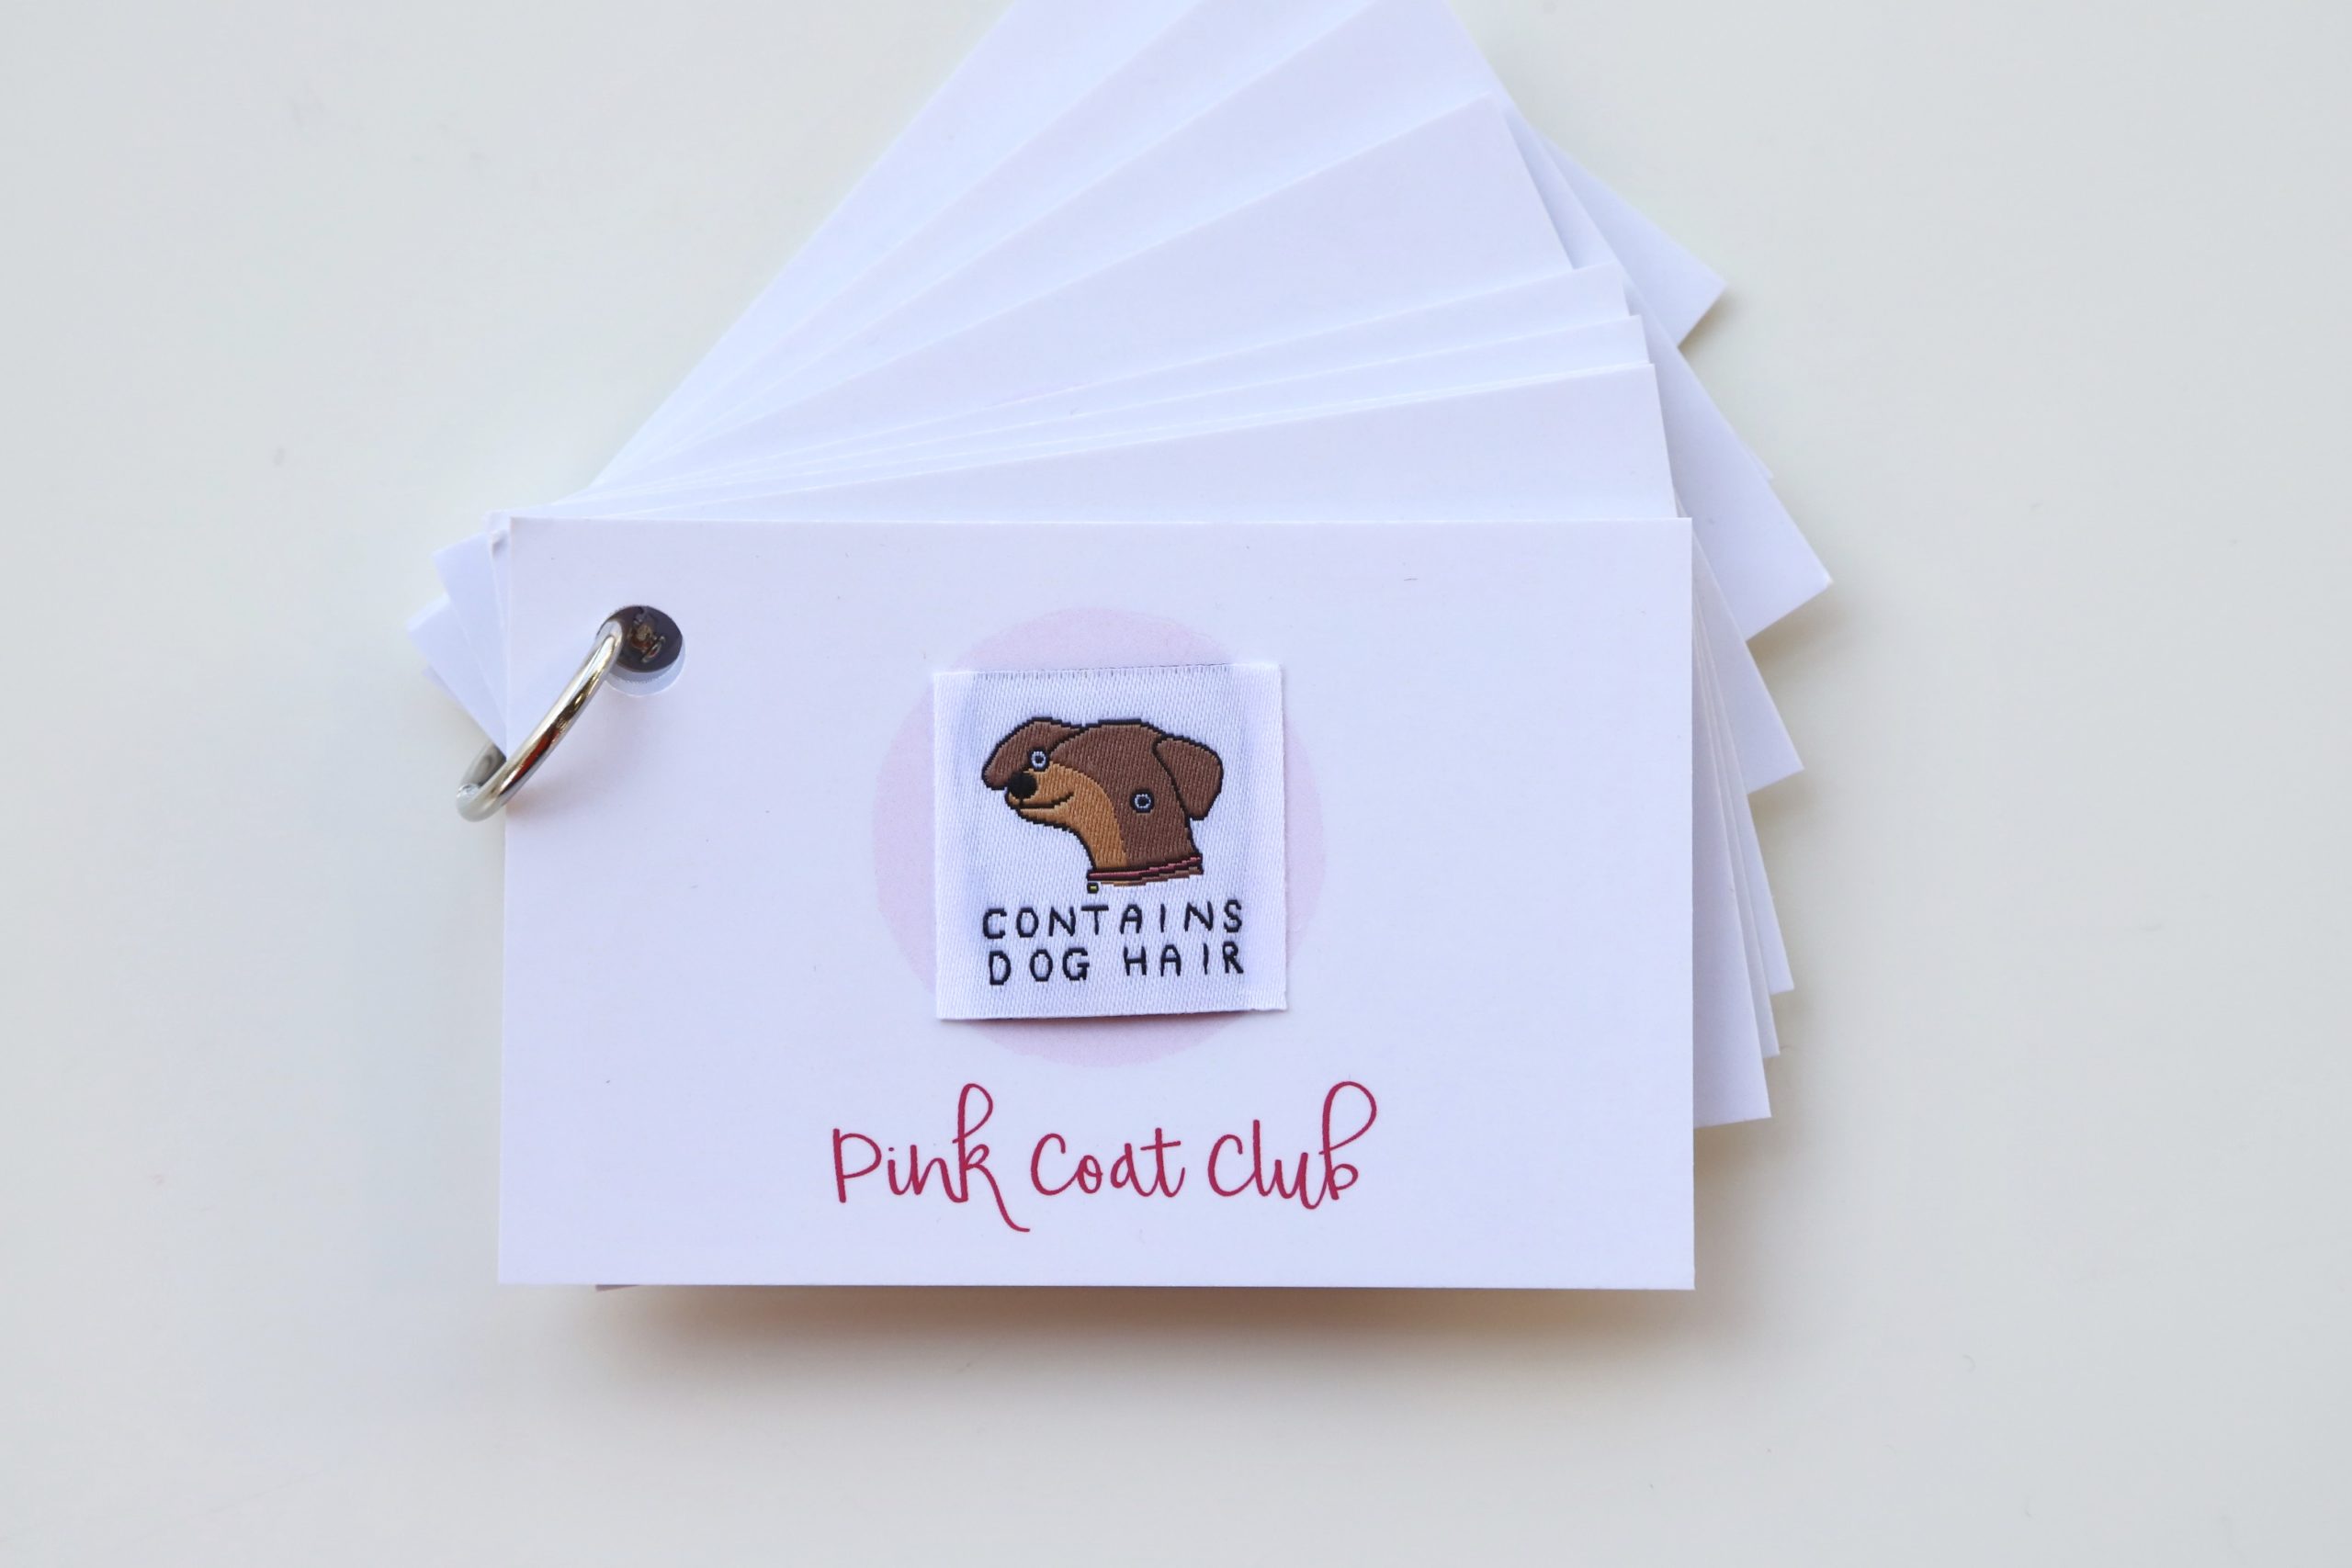 Contains Dog Hair (Chocolate) – 6 Garment Labels by Pink Coat Club